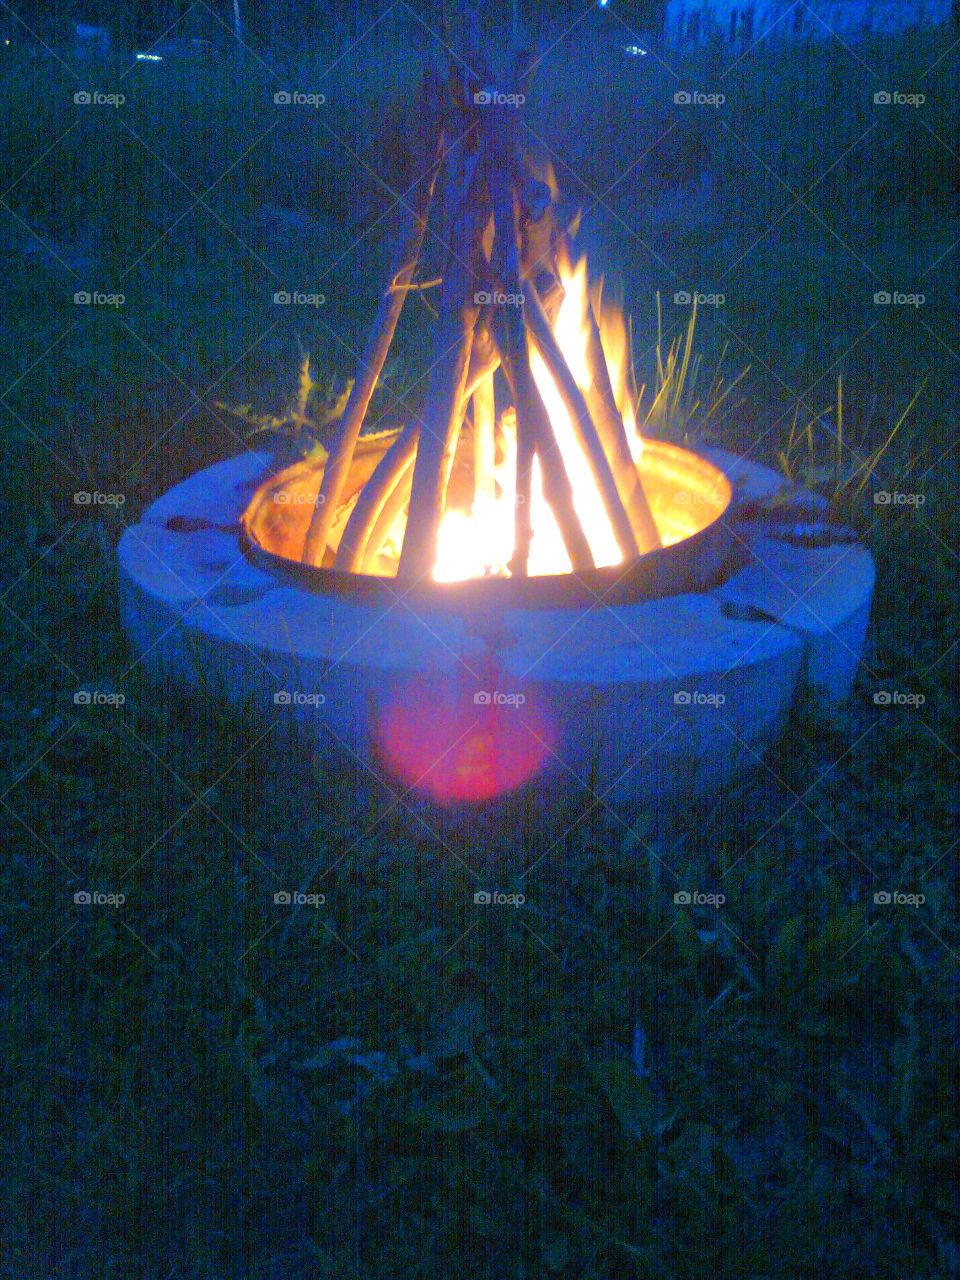 fire pit. we had to keep the mosquito's away. and it sure helped